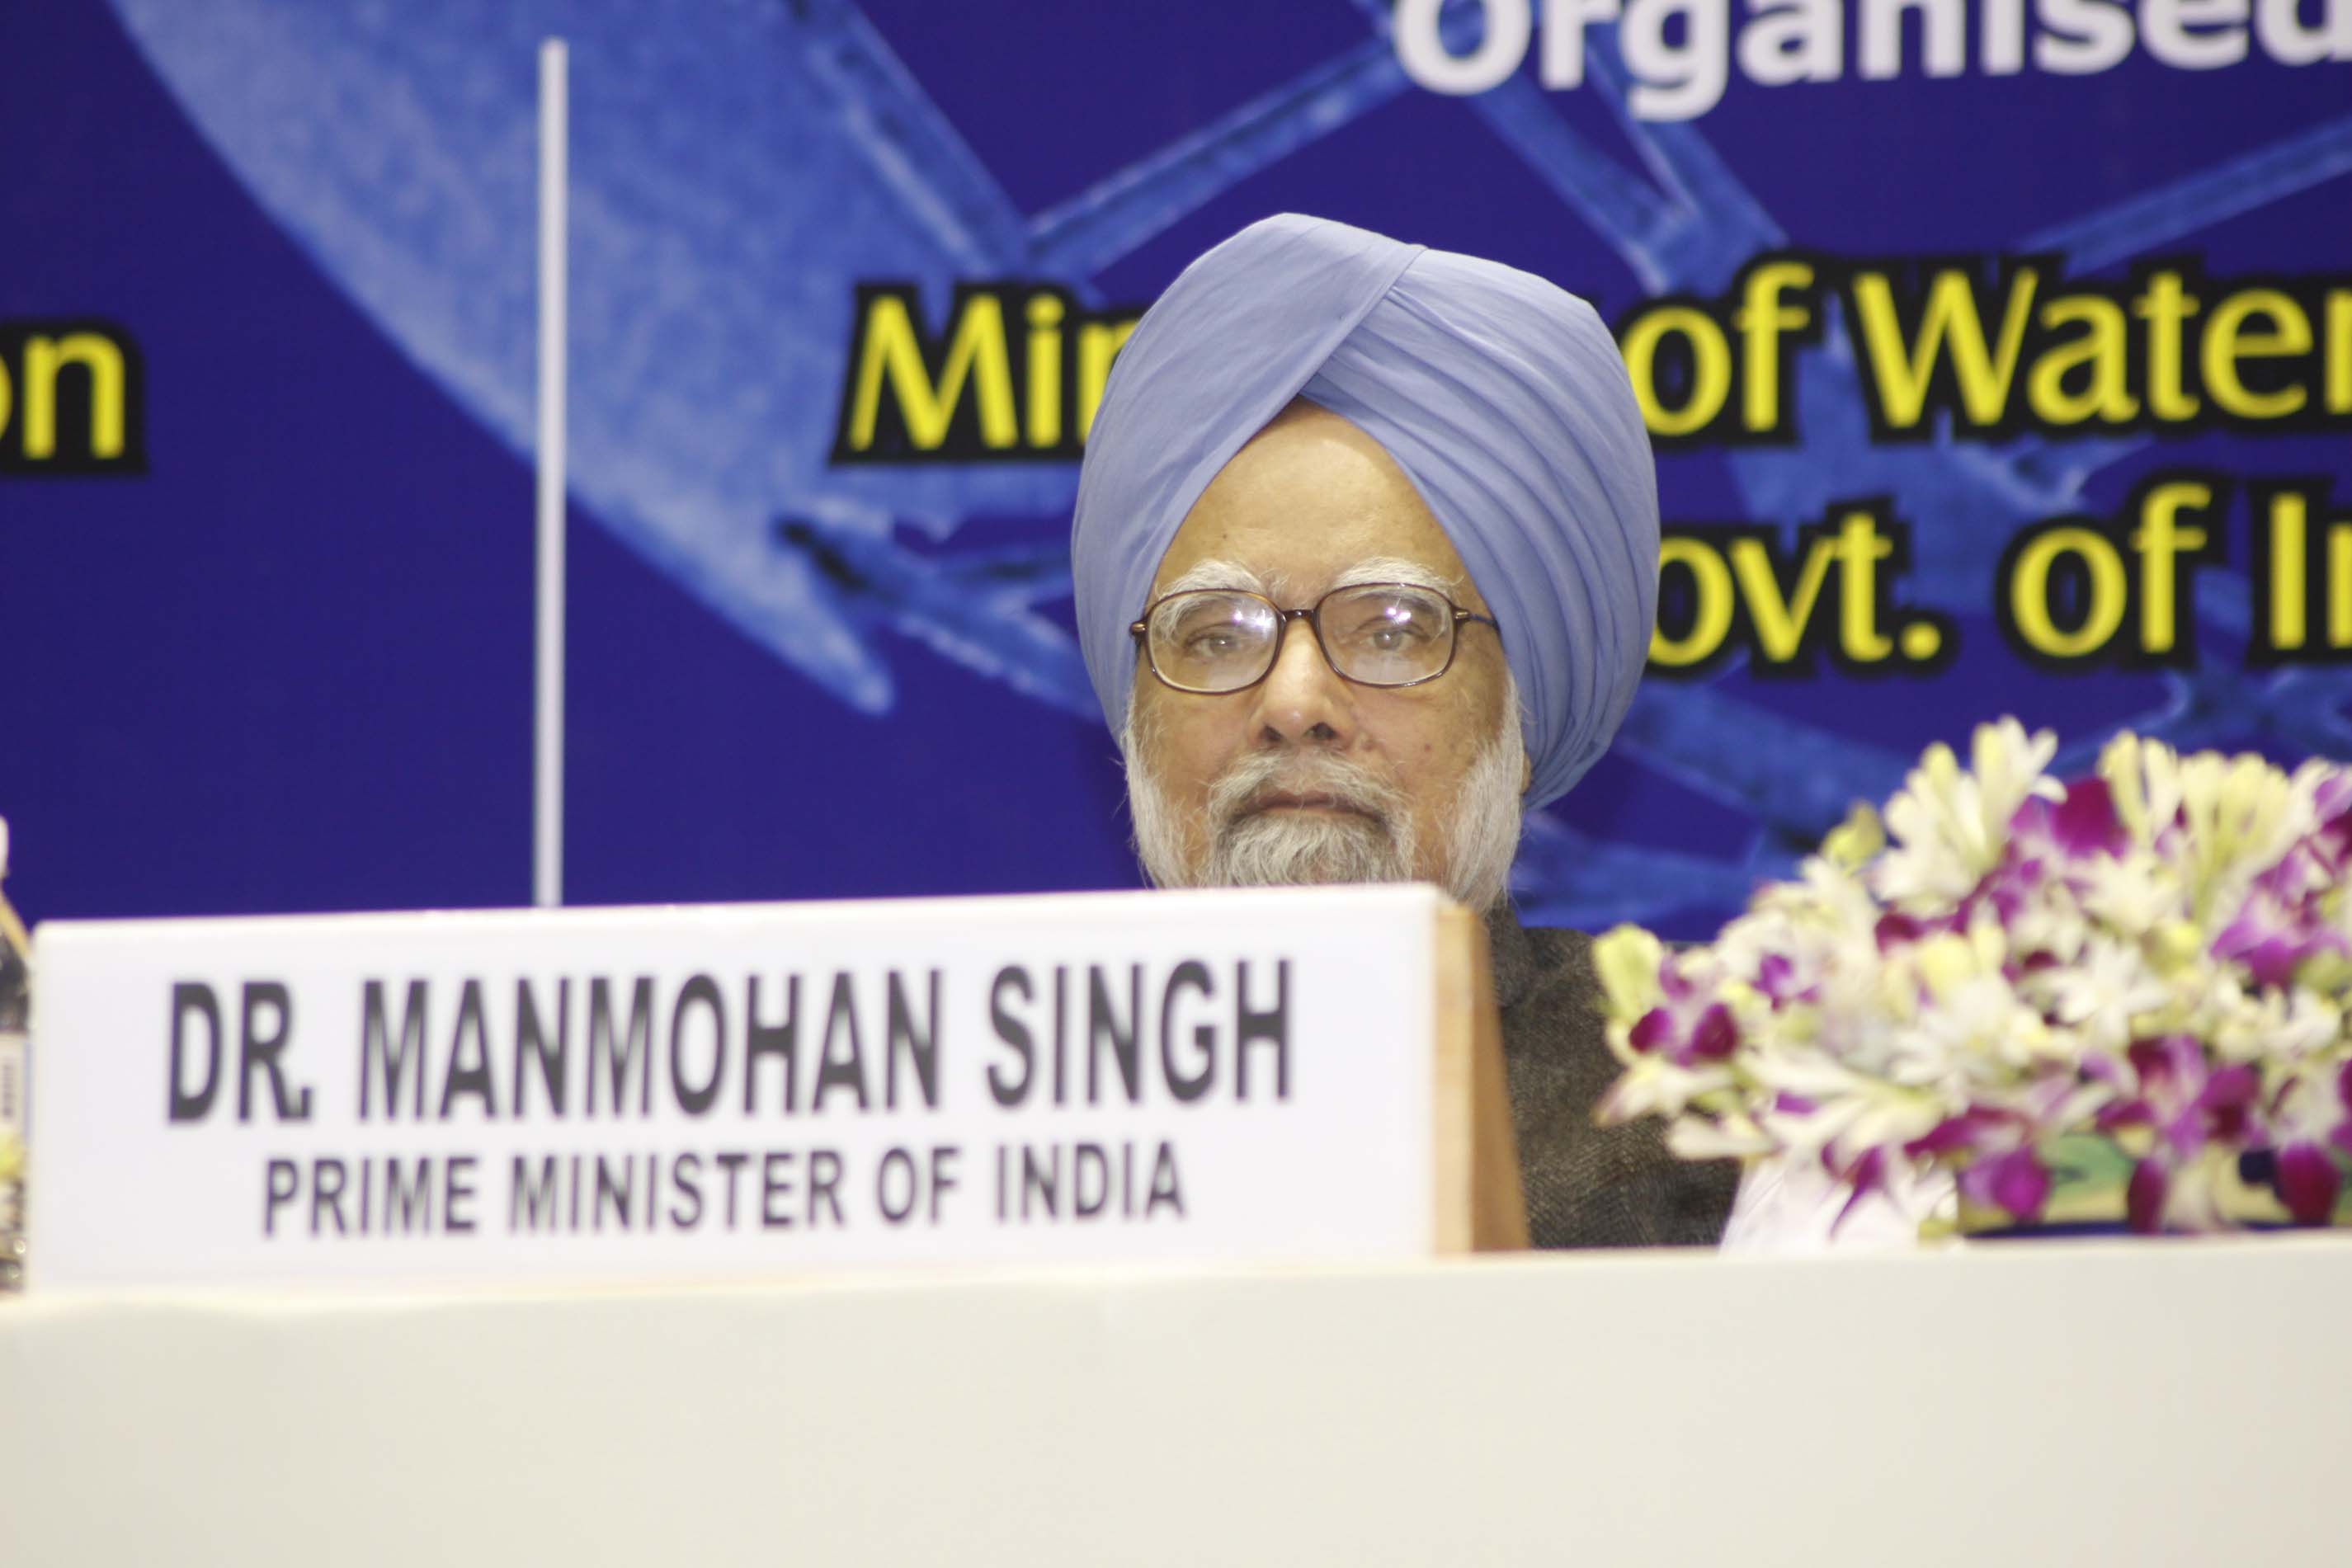 Hon'ble Prime Minister of India Dr. Manmohan Singh at the inaugural ceremony of the 5th Asian Regional Conference, New Delhi, 2009